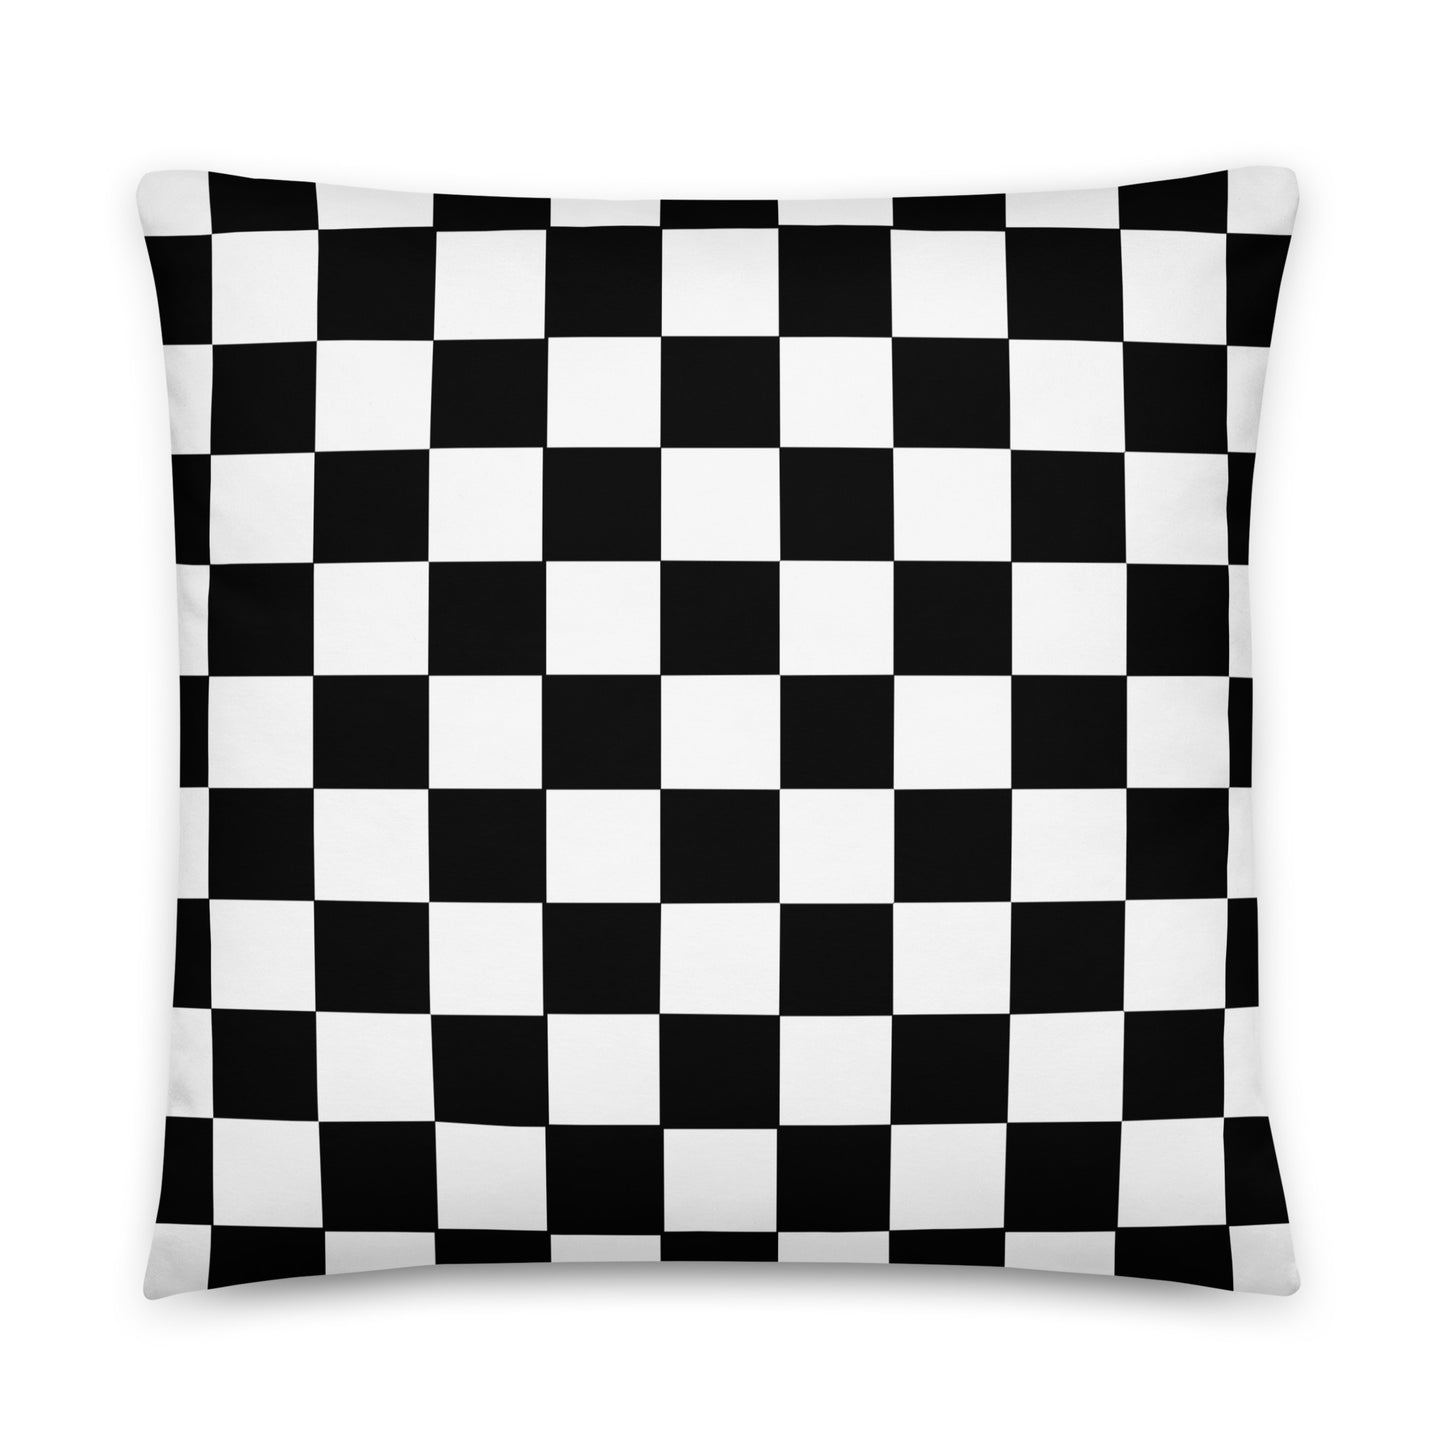 Black & White Chequered Flag - Sustainably Made Pillows